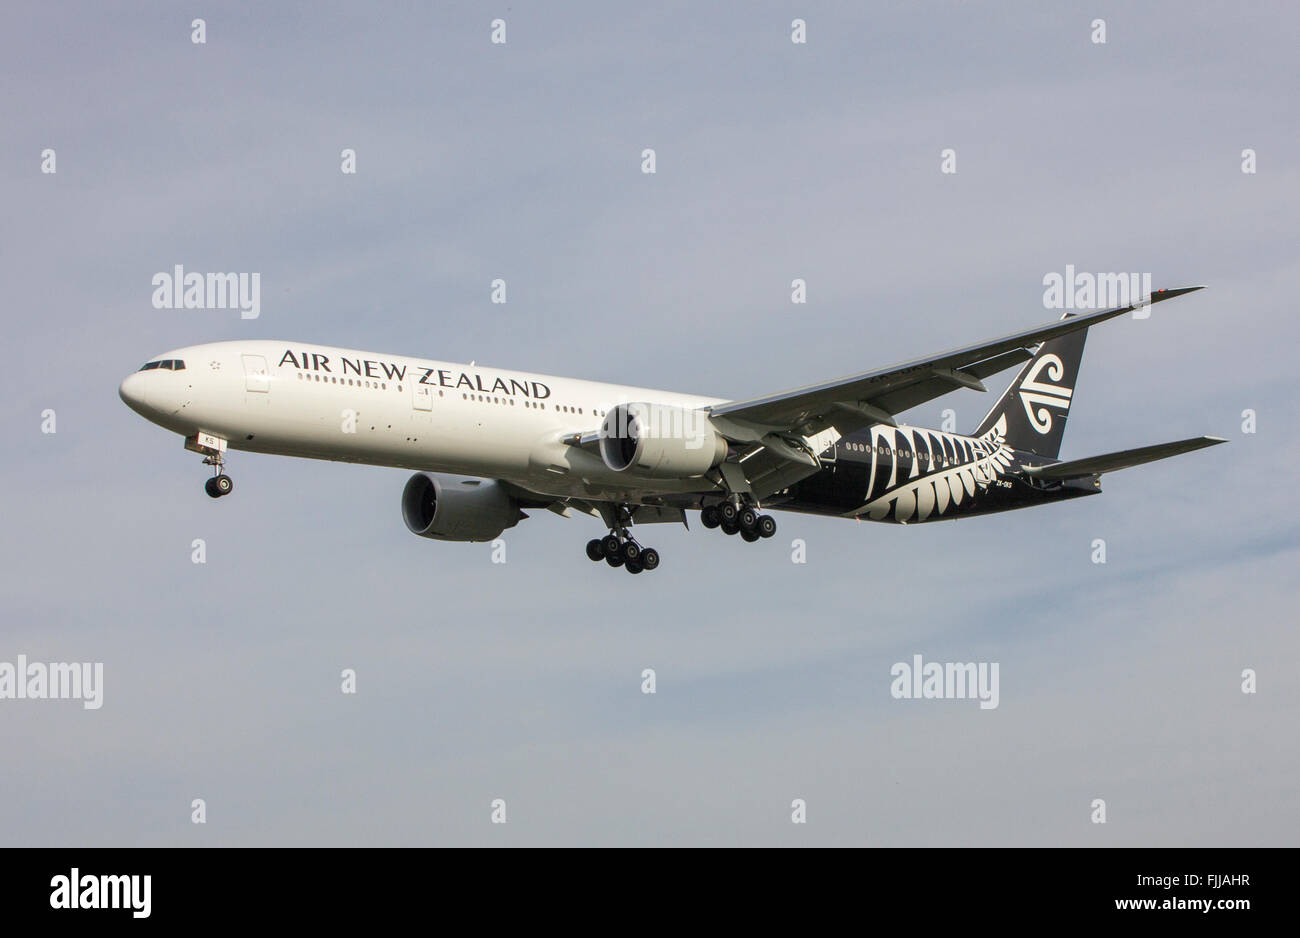 Boeing 777 Air New Zealand Airlines landing at LHR London Heathrow Airport Stock Photo